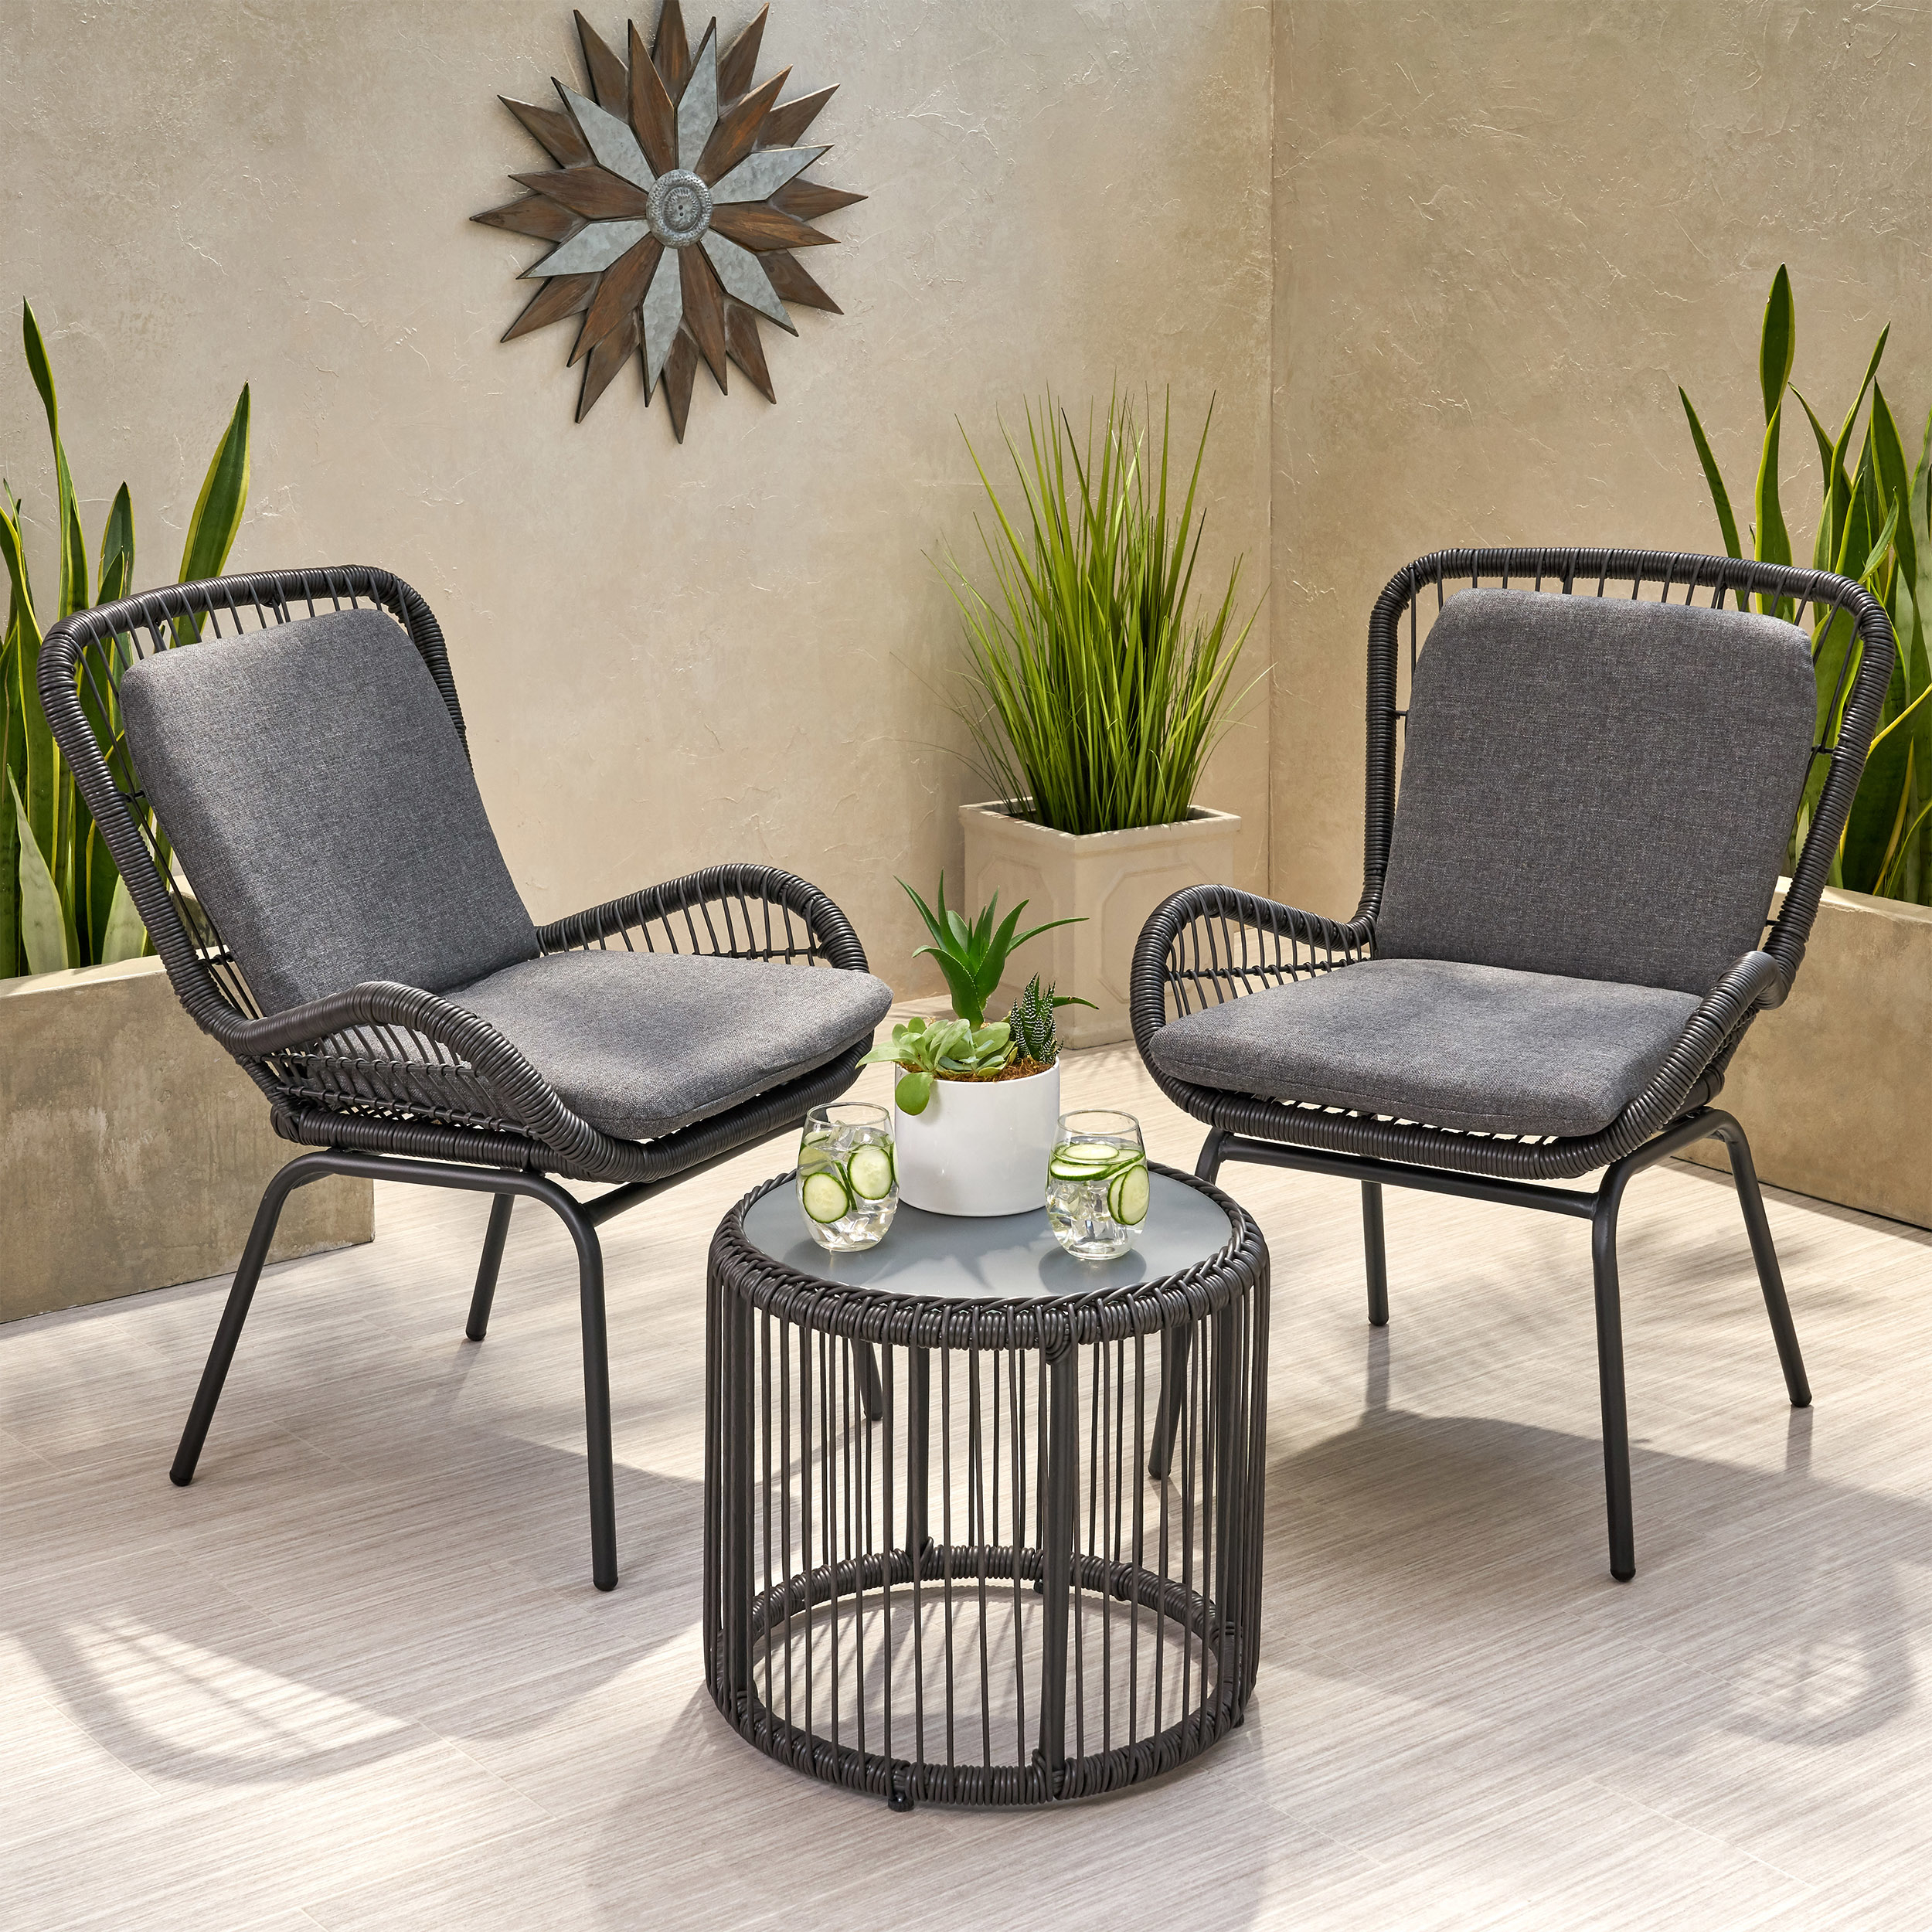 Belle Outdoor Wicker Chat Set With Cushions - Gray + Dark Gray + Black